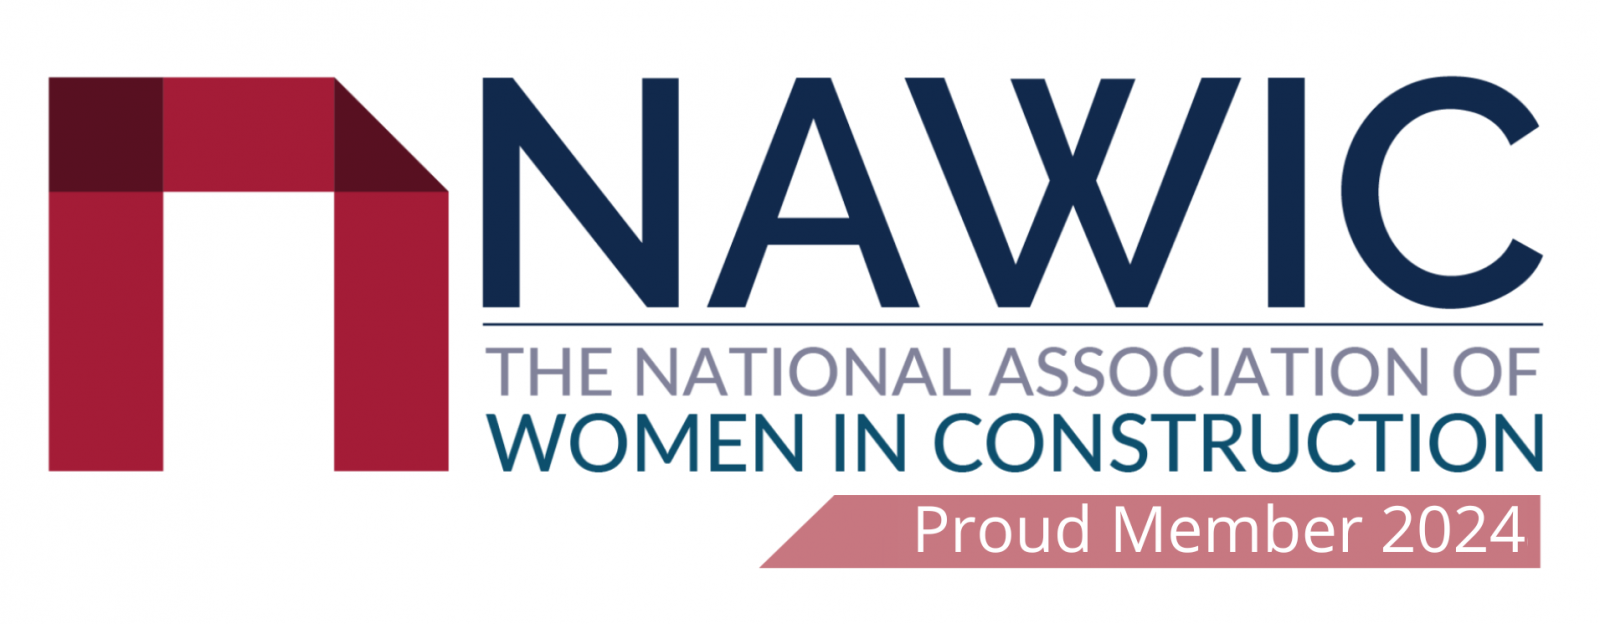 Proud Member 2024 of The National Association of Women In Construction